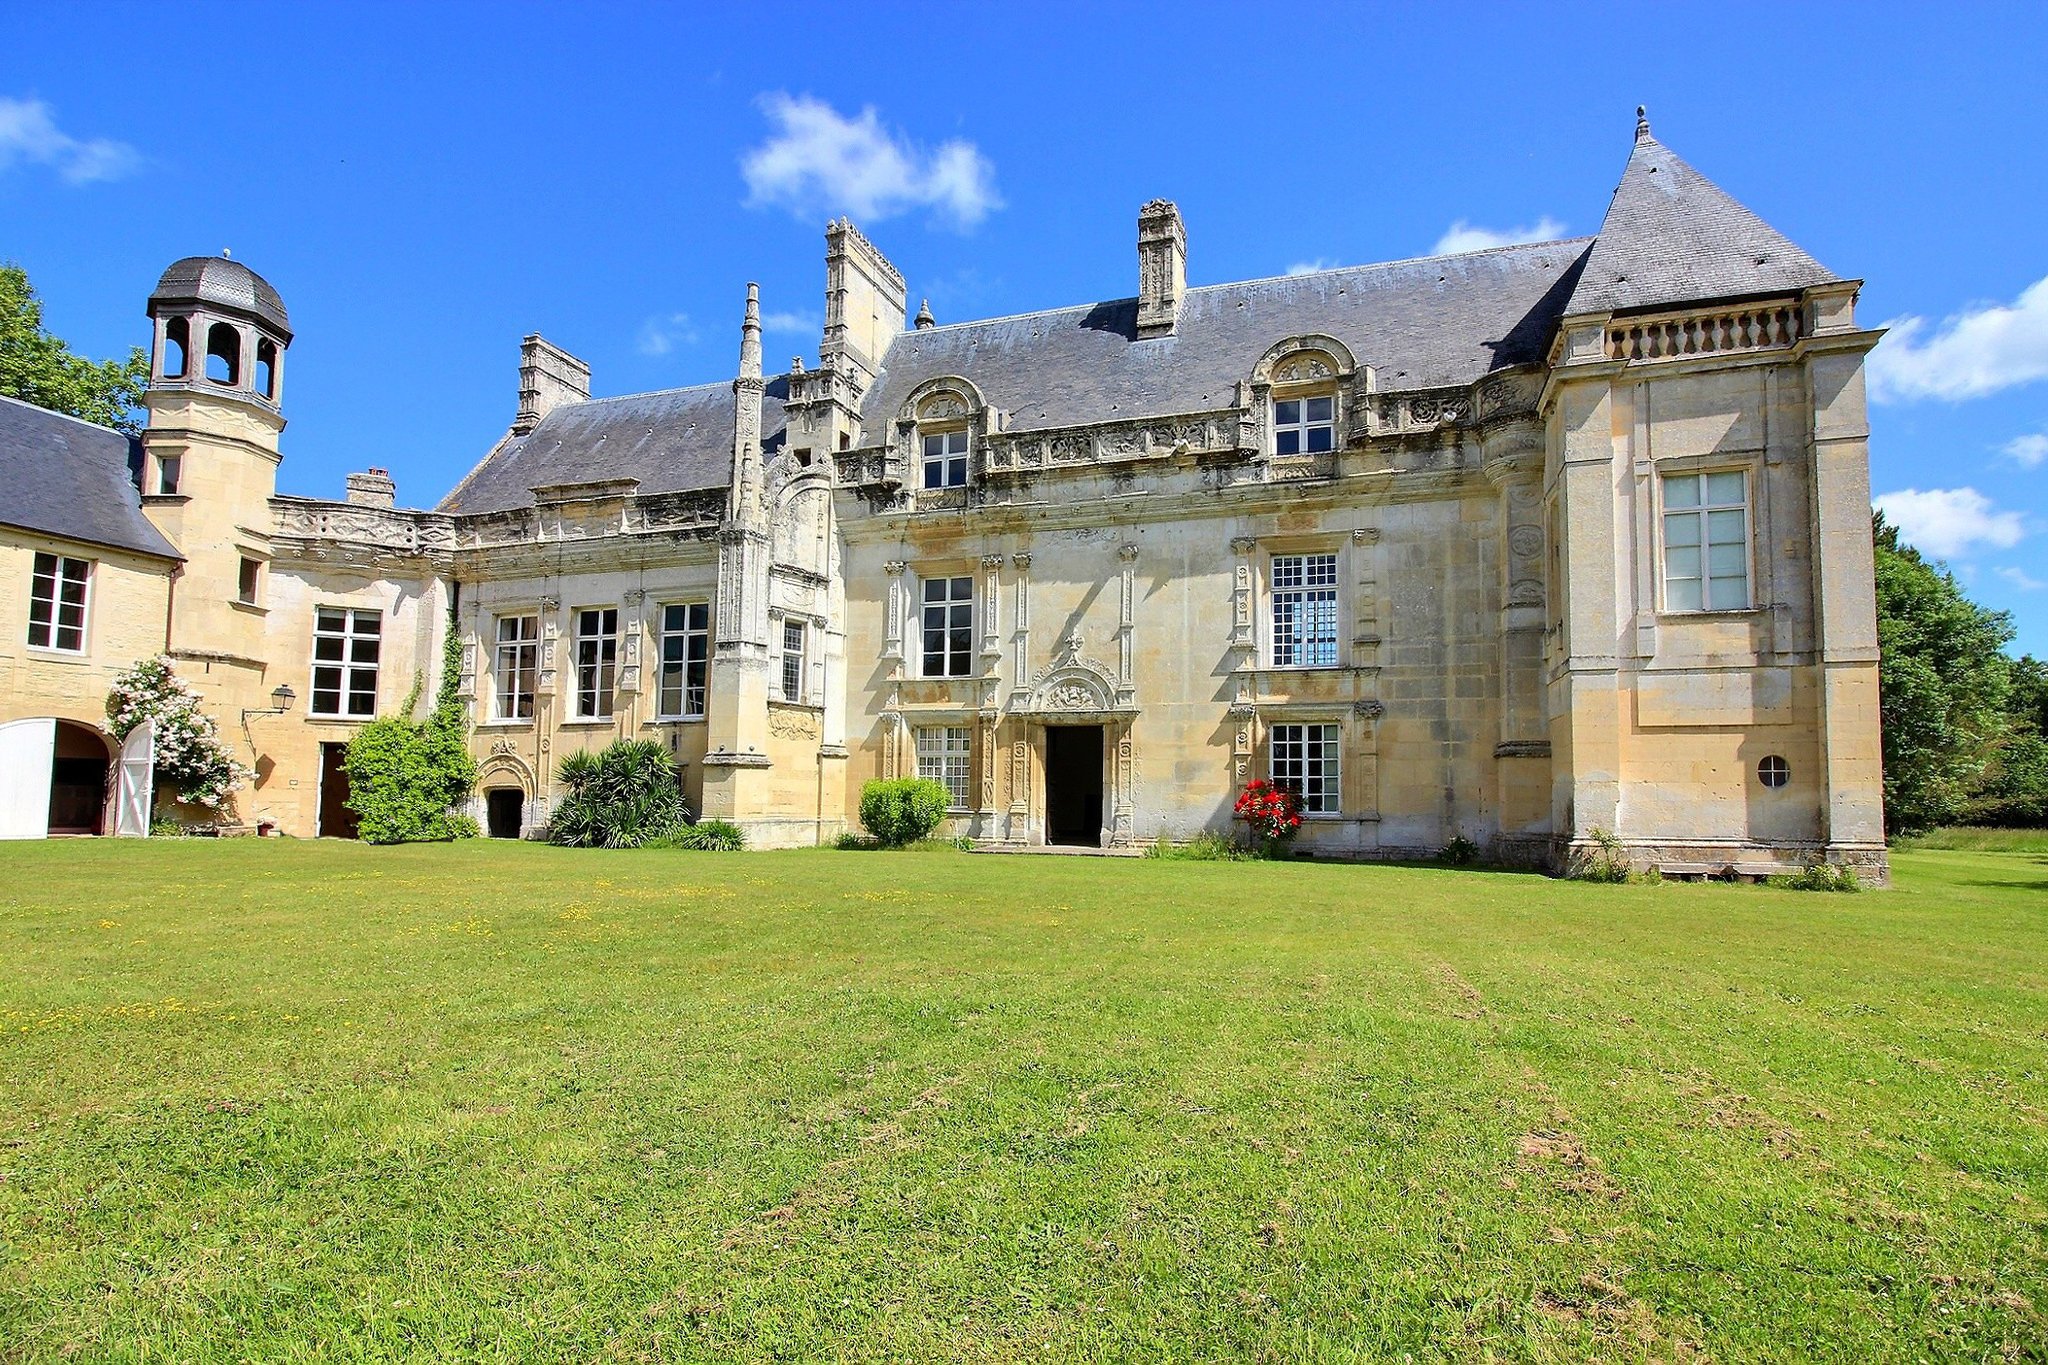 Francis York Renaissance Chateau in Normandy, France Listed for €1.5M  1.jpg